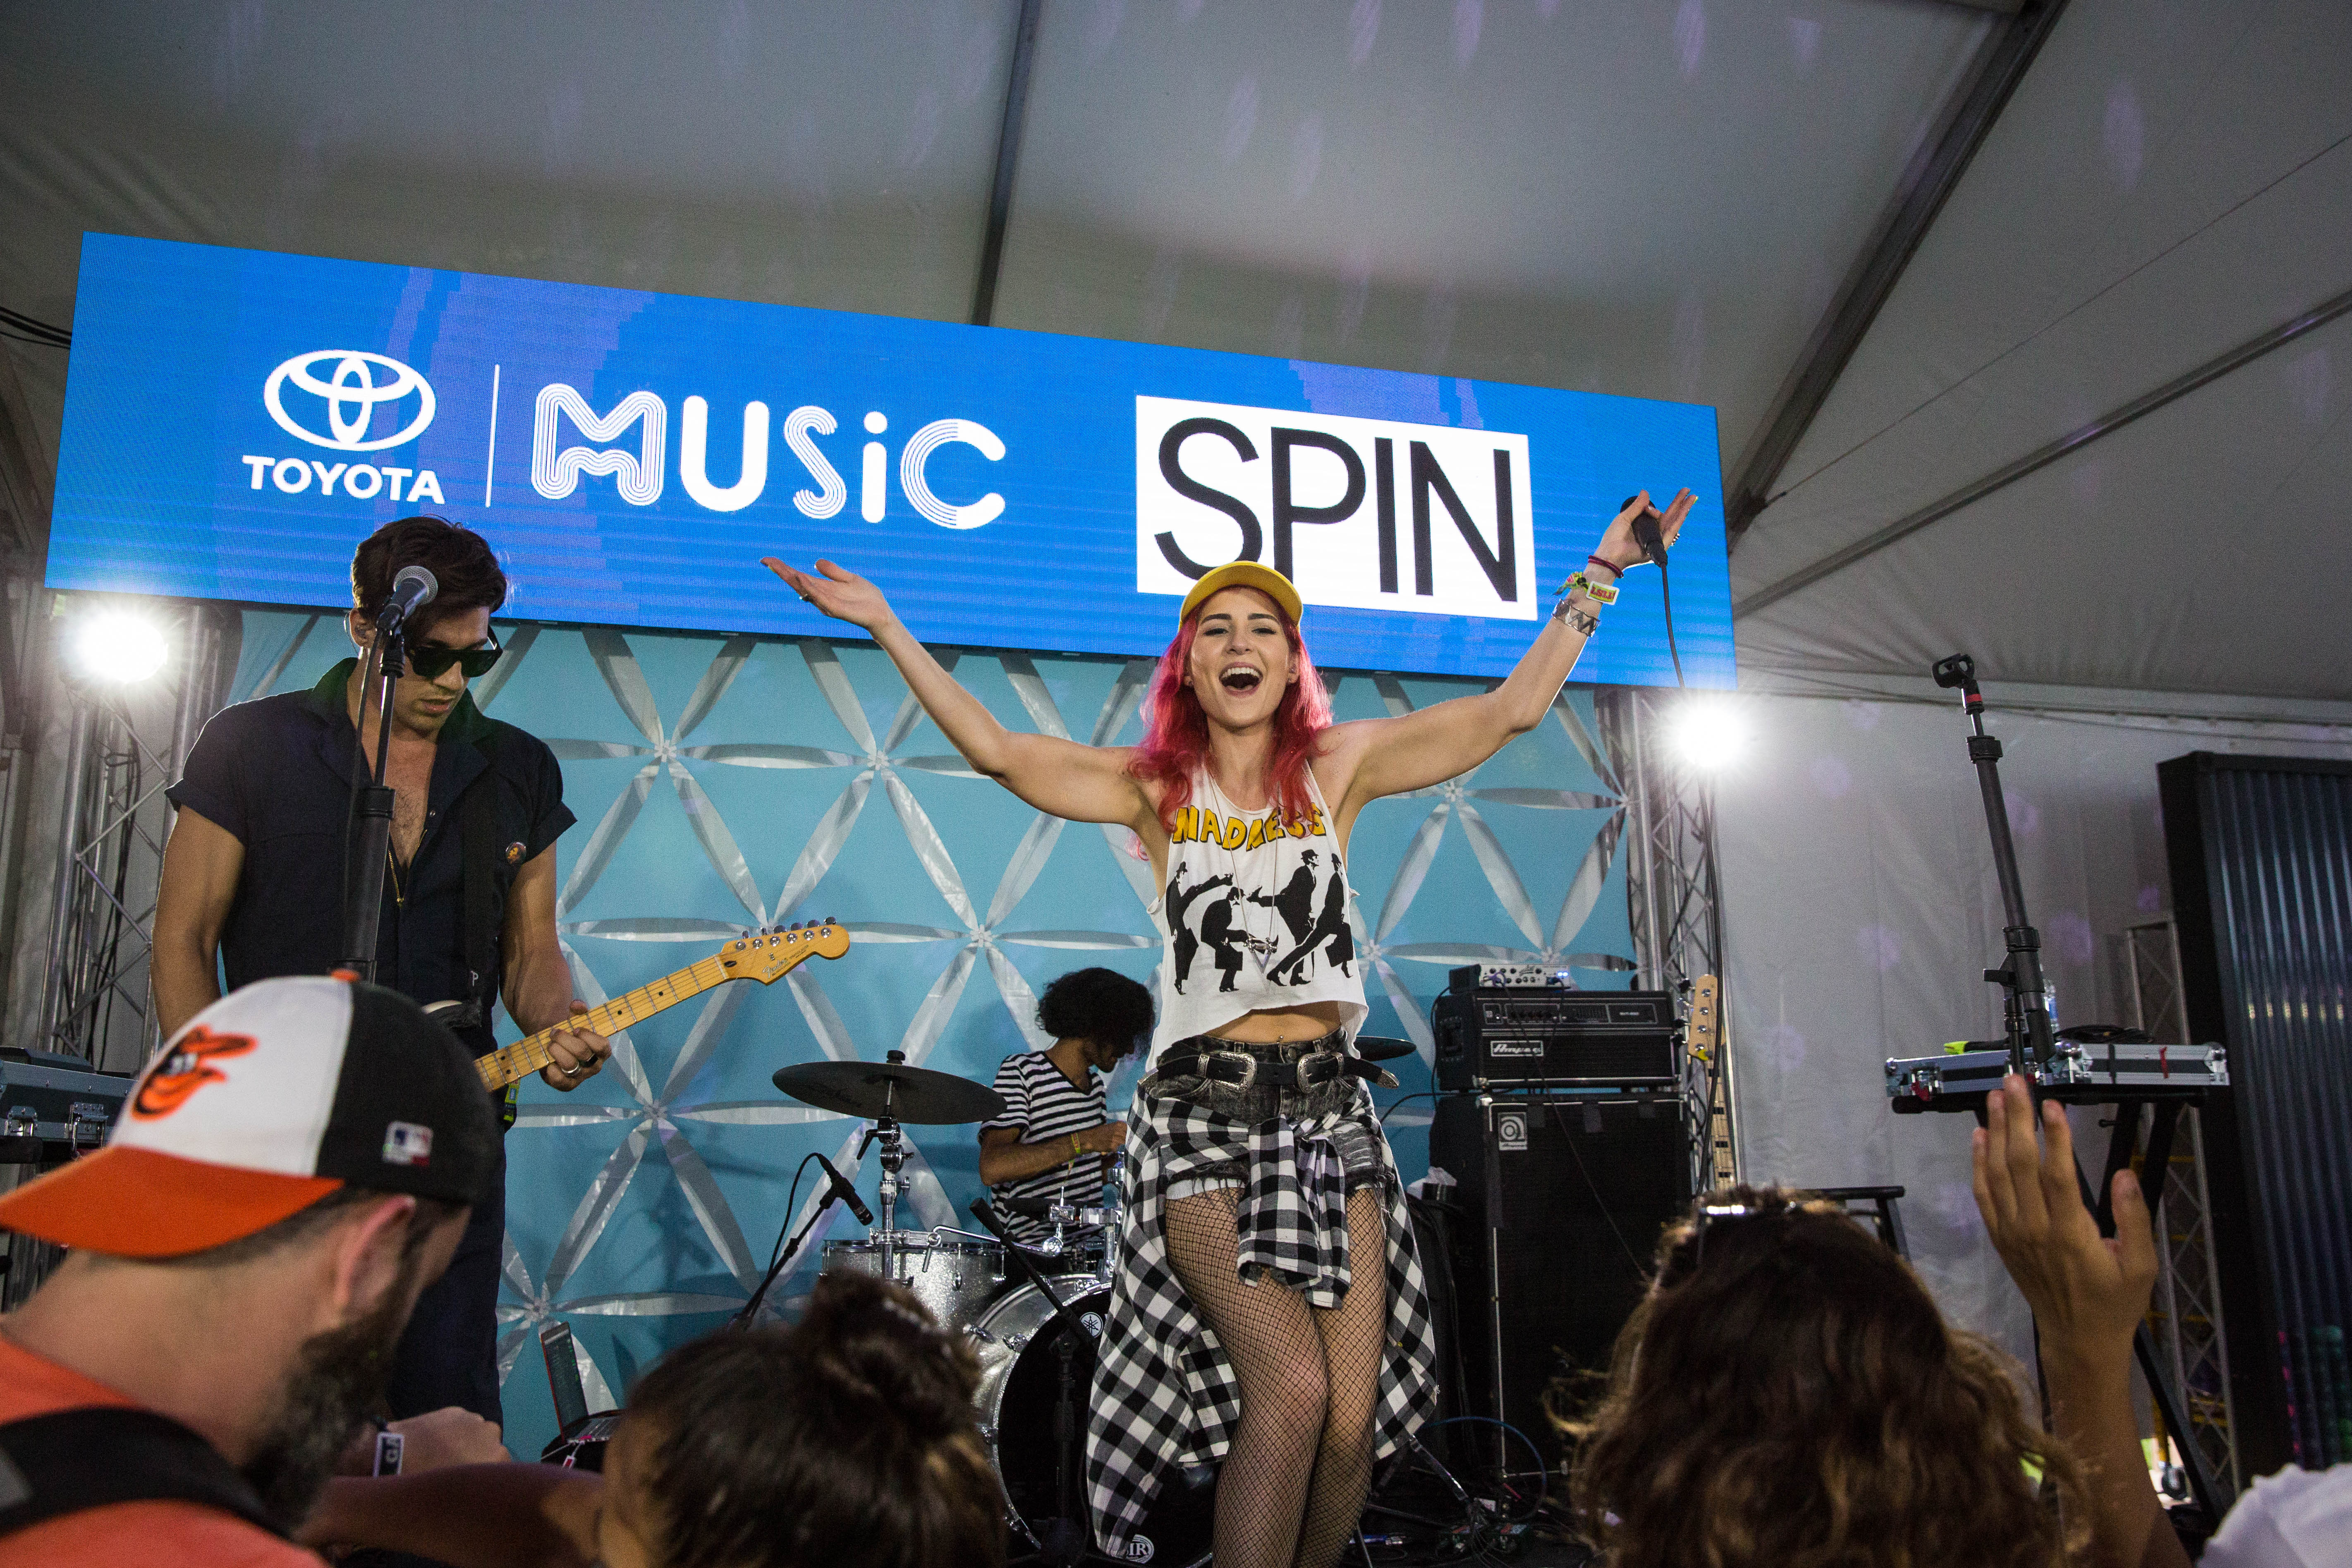 SPIN at Firefly 2016: Day 1 at Toyota Music Den with the Wombats, Saint Motel, and More